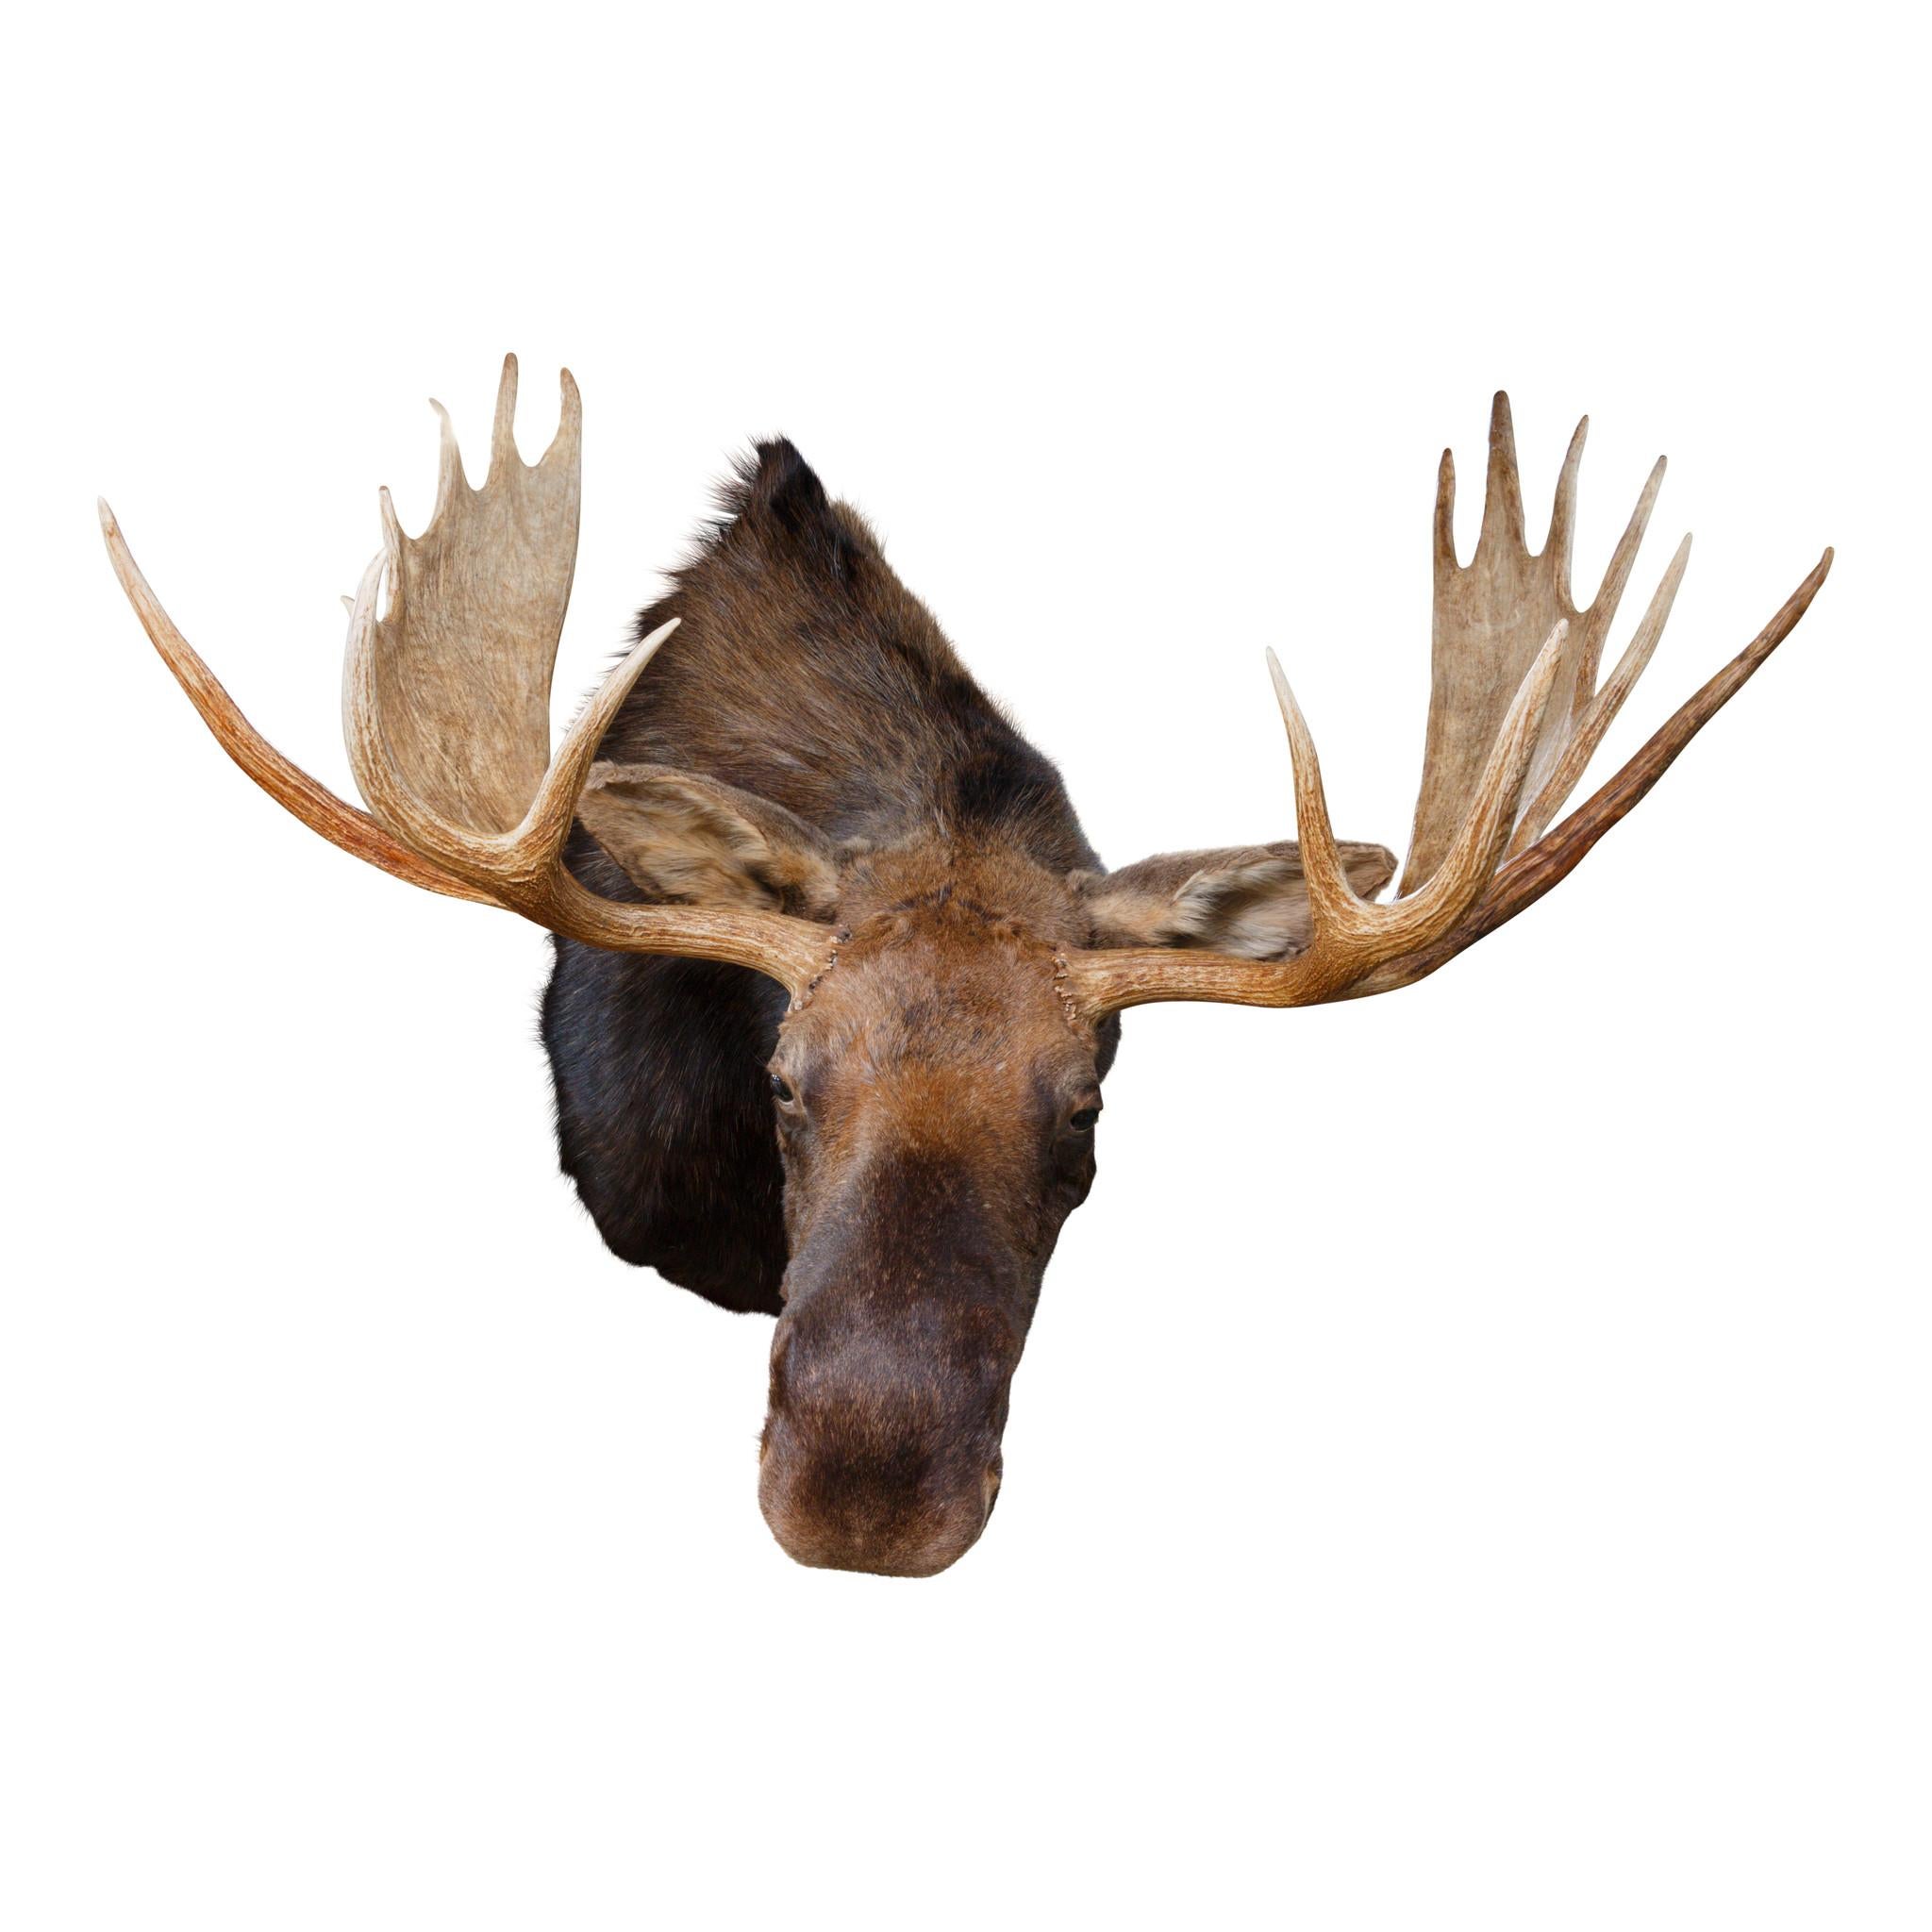 Large shiras moose taxidermy mount with double brow tines. Nice mount, not 